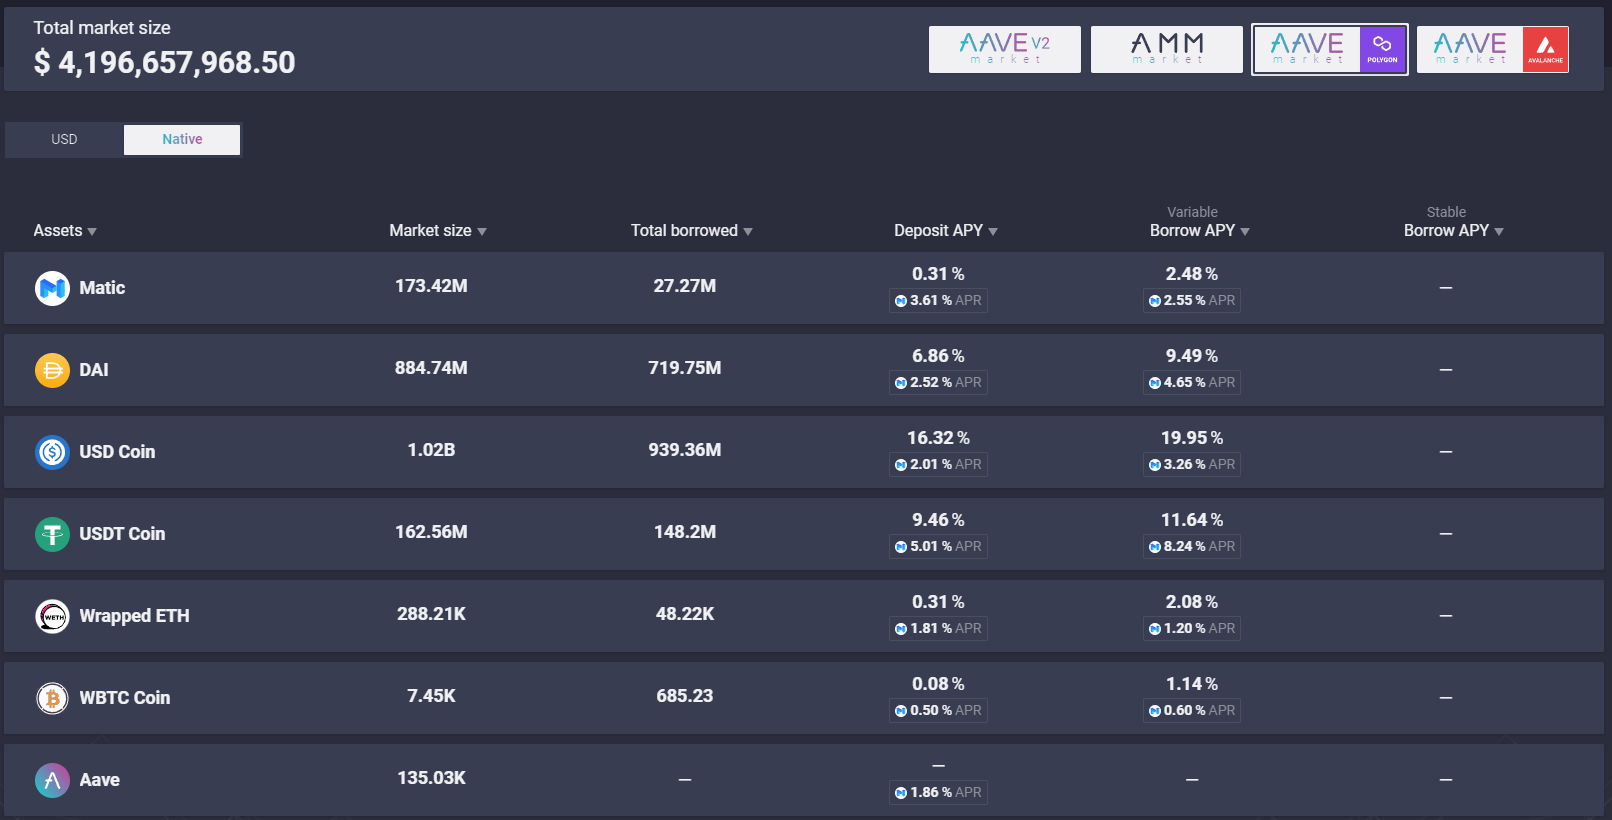 A view of the Markets tab of AAVE V2 on Polygon Network